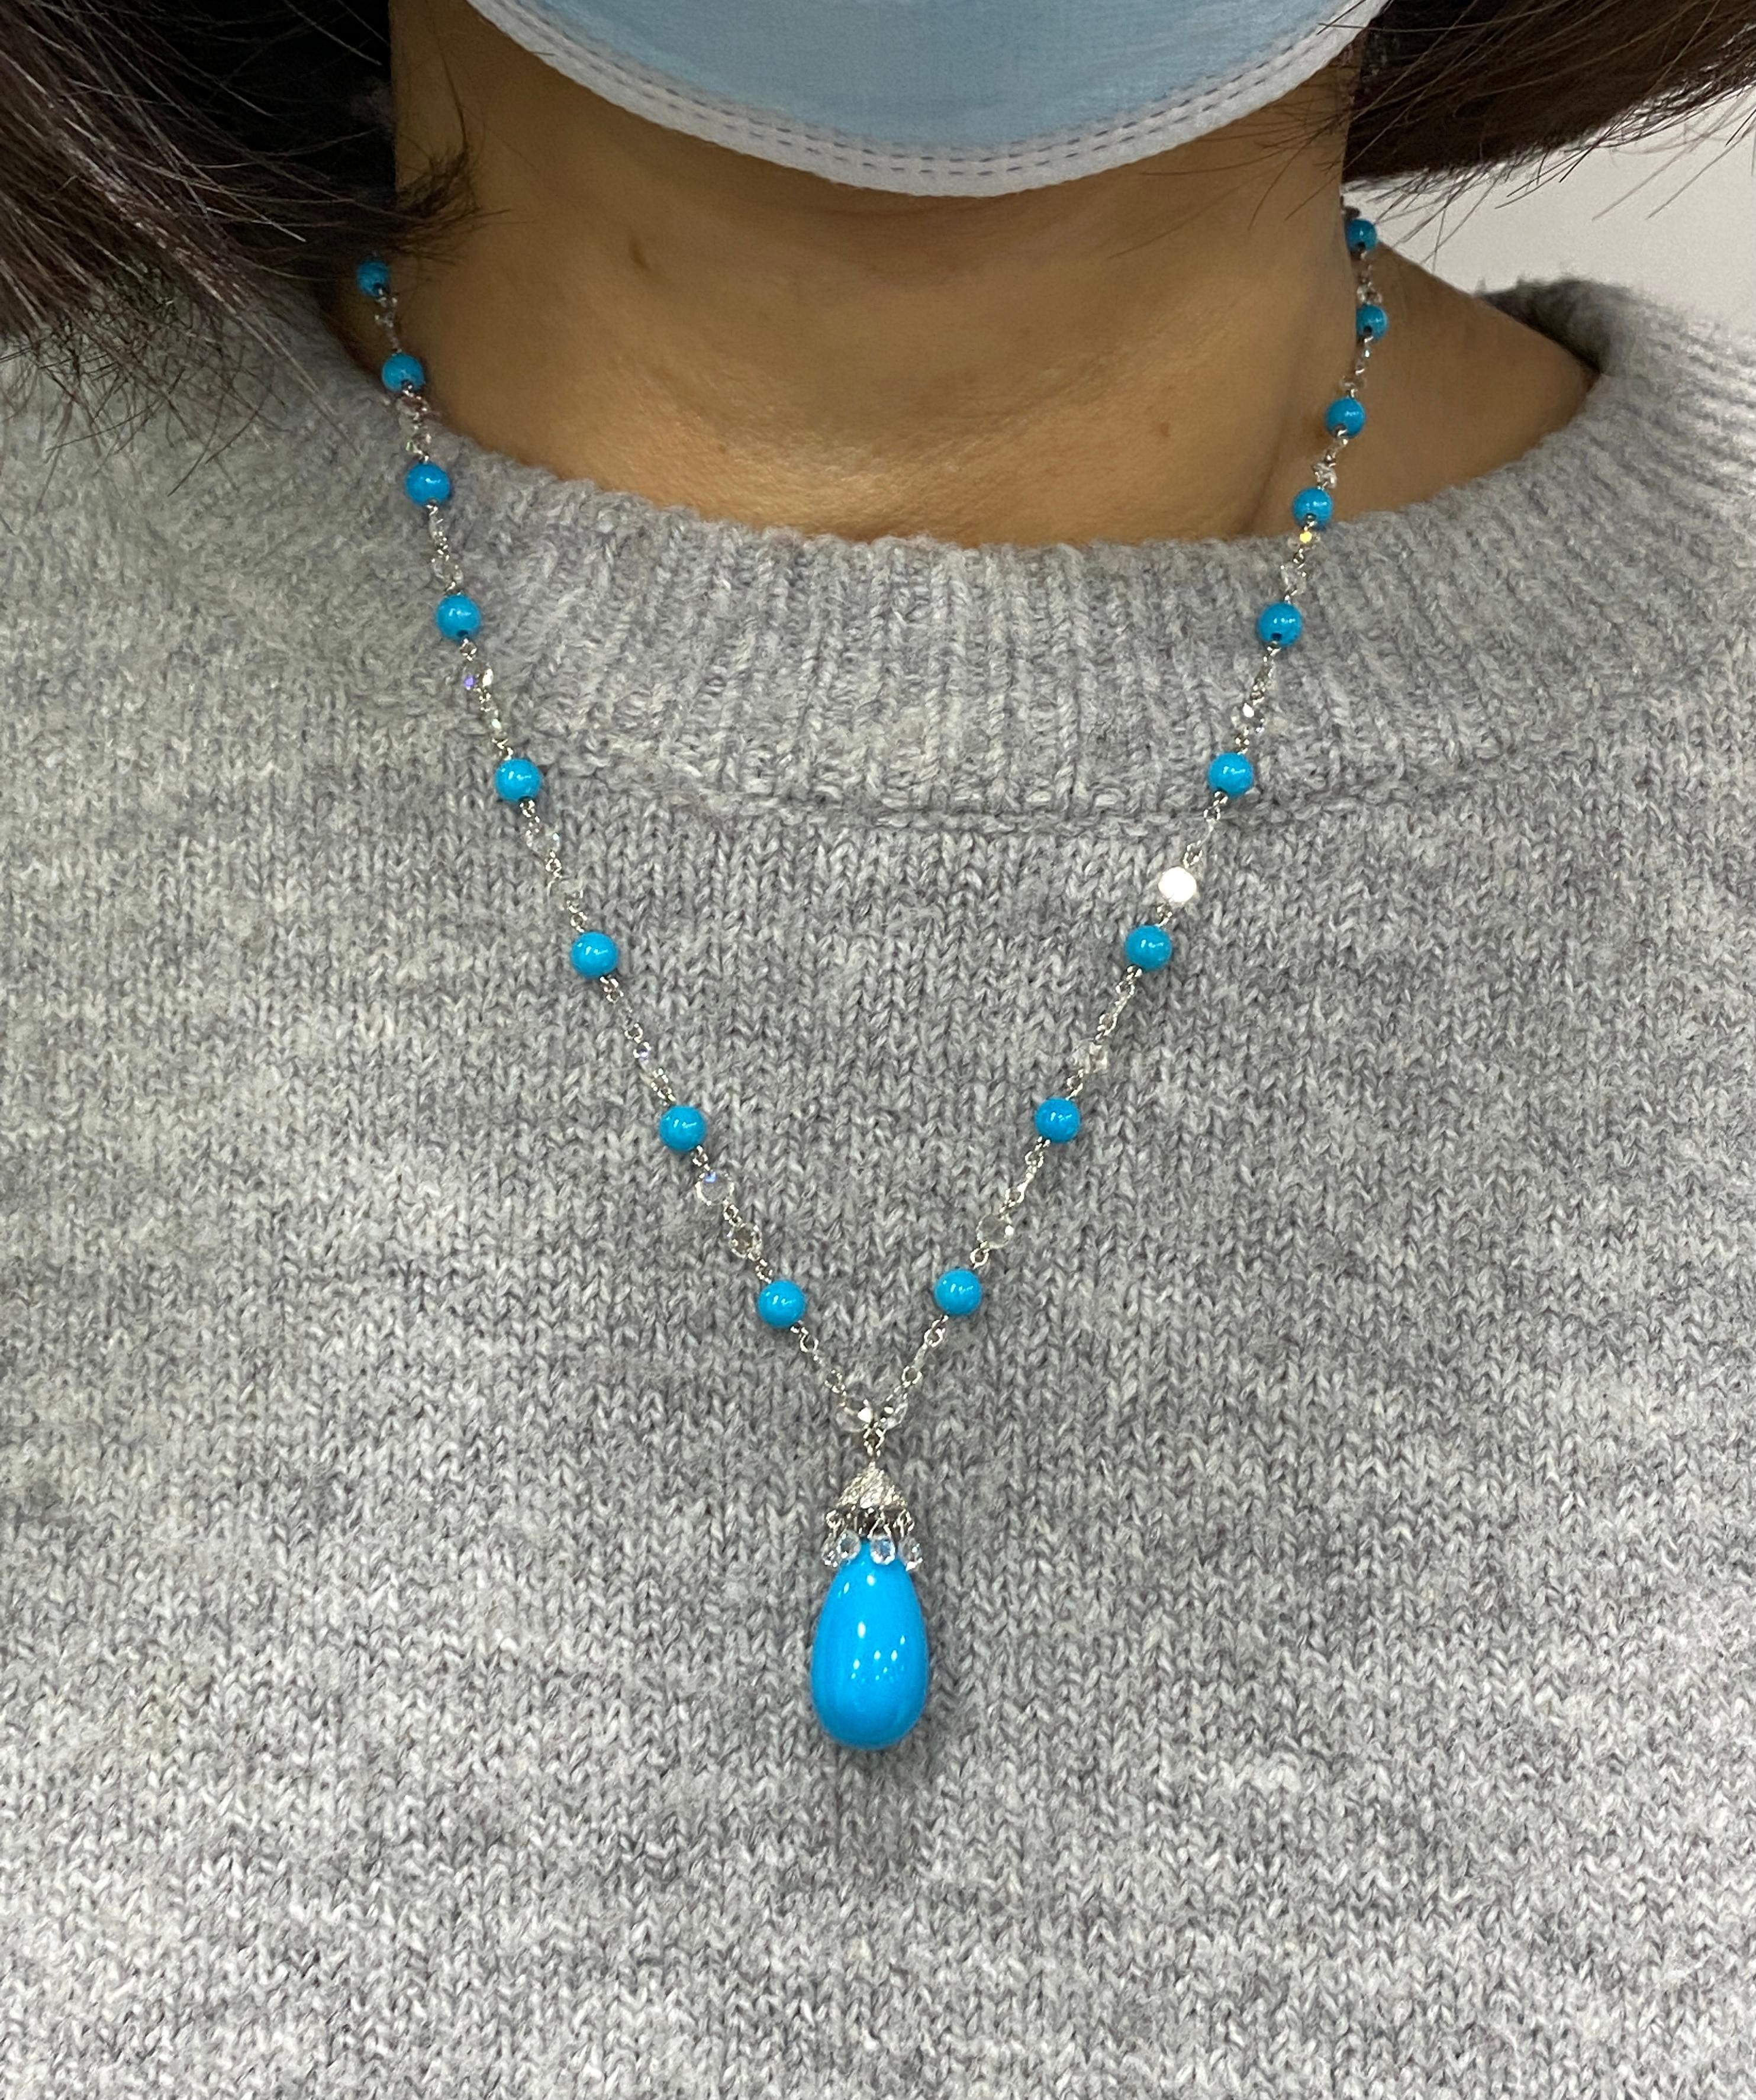 JR 18 Karat White Gold Drop Diamond Rose cut & Briolettes Turquoise Necklace

Every necklace has a story to tell! This fine Rose cut diamond necklace with Turquoise has a subtle and elegant design that goes with most outfits, it’s blue color makes